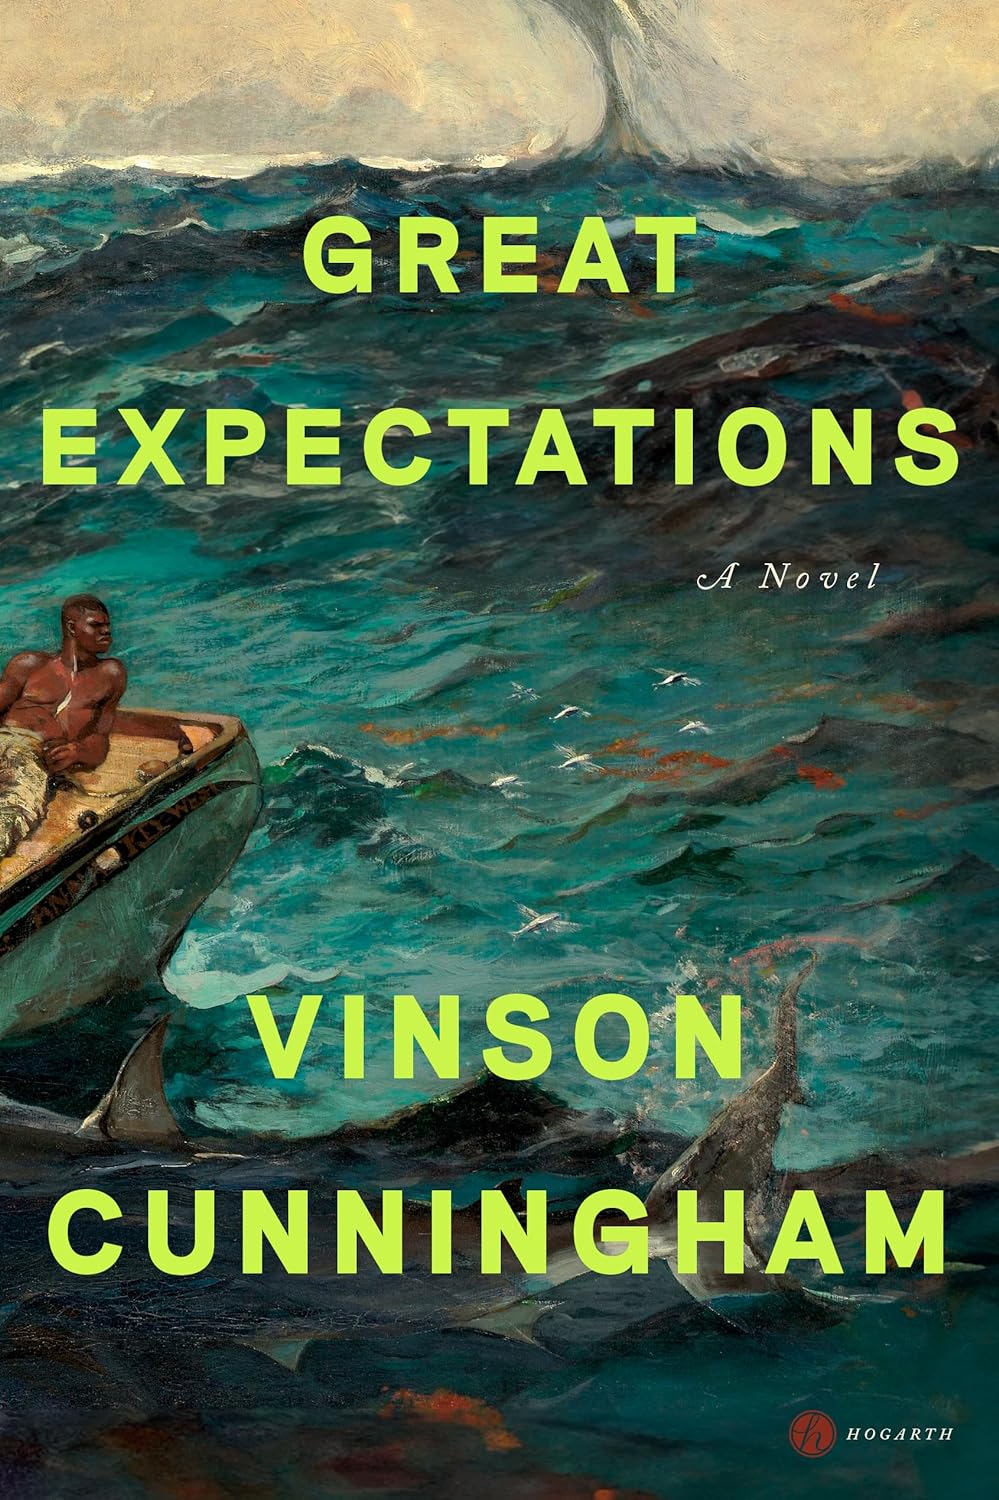 Vinson Cunningham, <em><a href=https://lithub.com/the-22-best-book-covers-of-march/"https://bookshop.org/a/132/9780593448236" target="_blank" rel="noopener">Great Expectations</a></em>; cover design by Anna Kochman (Hogarth, March 12)